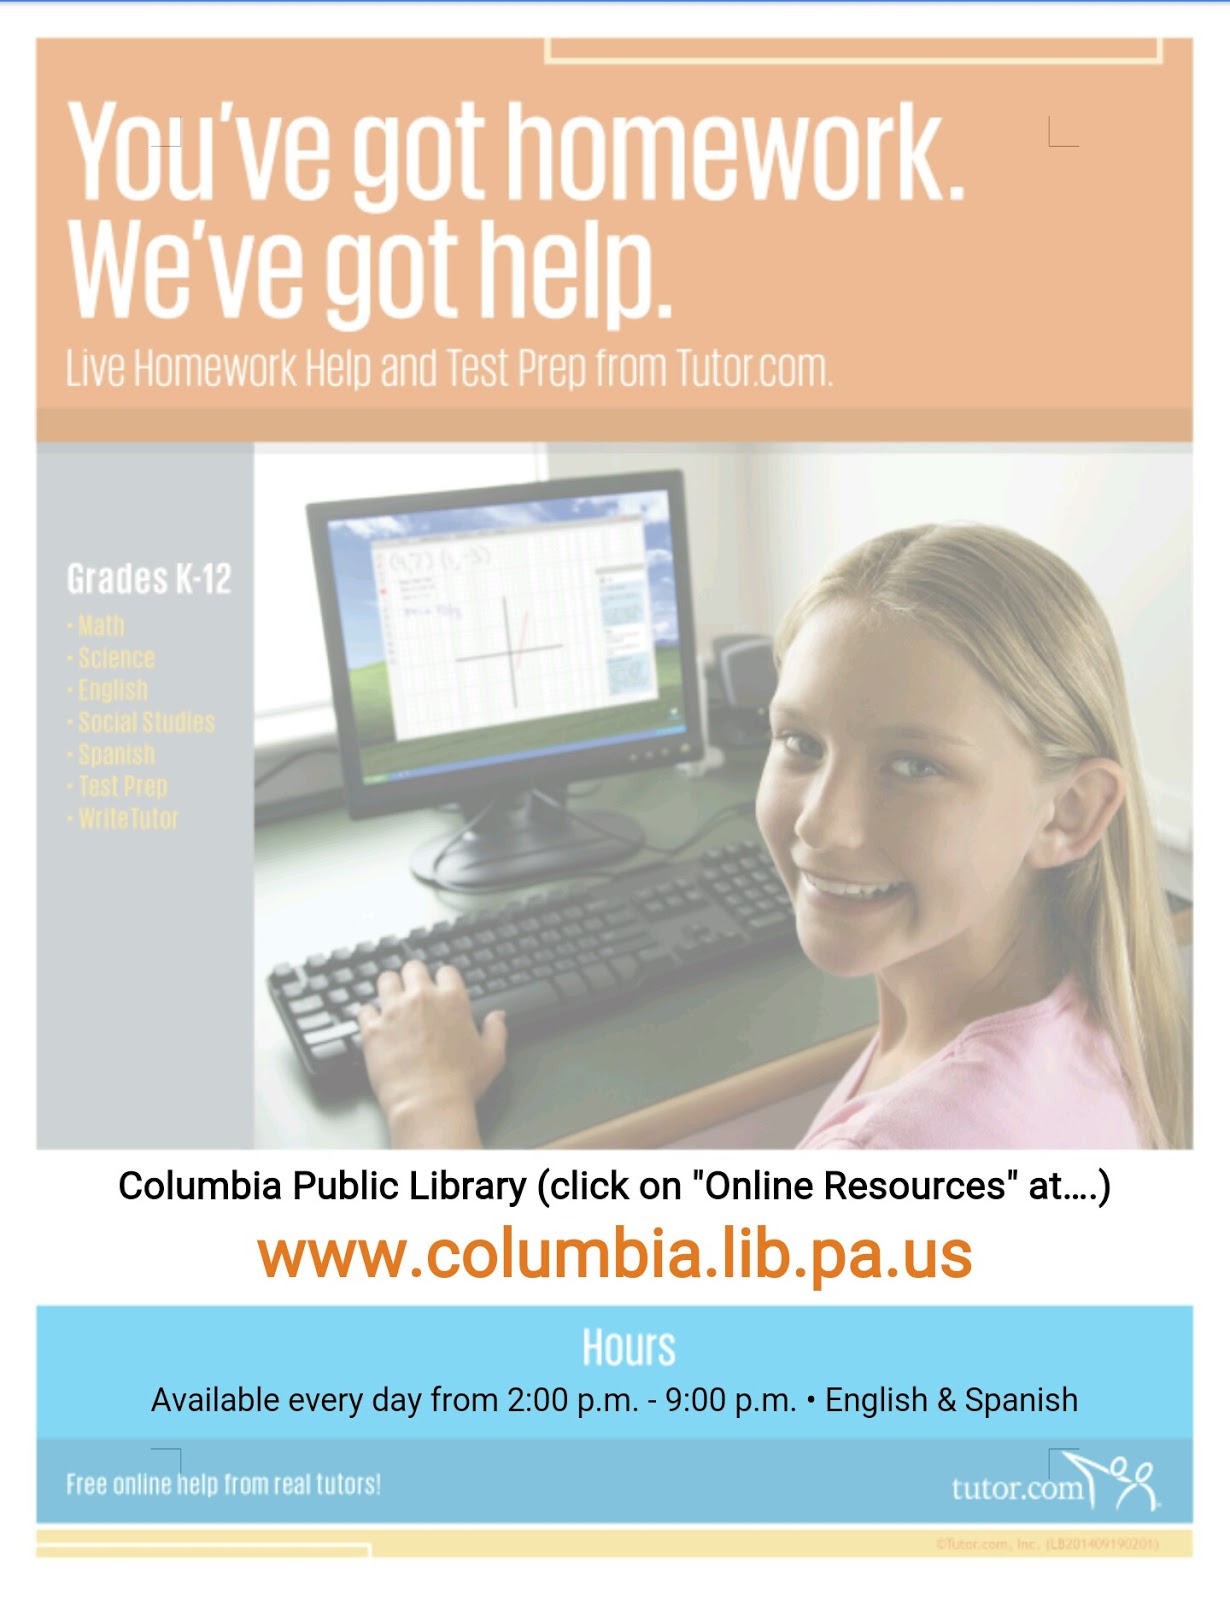 Homework help at the library